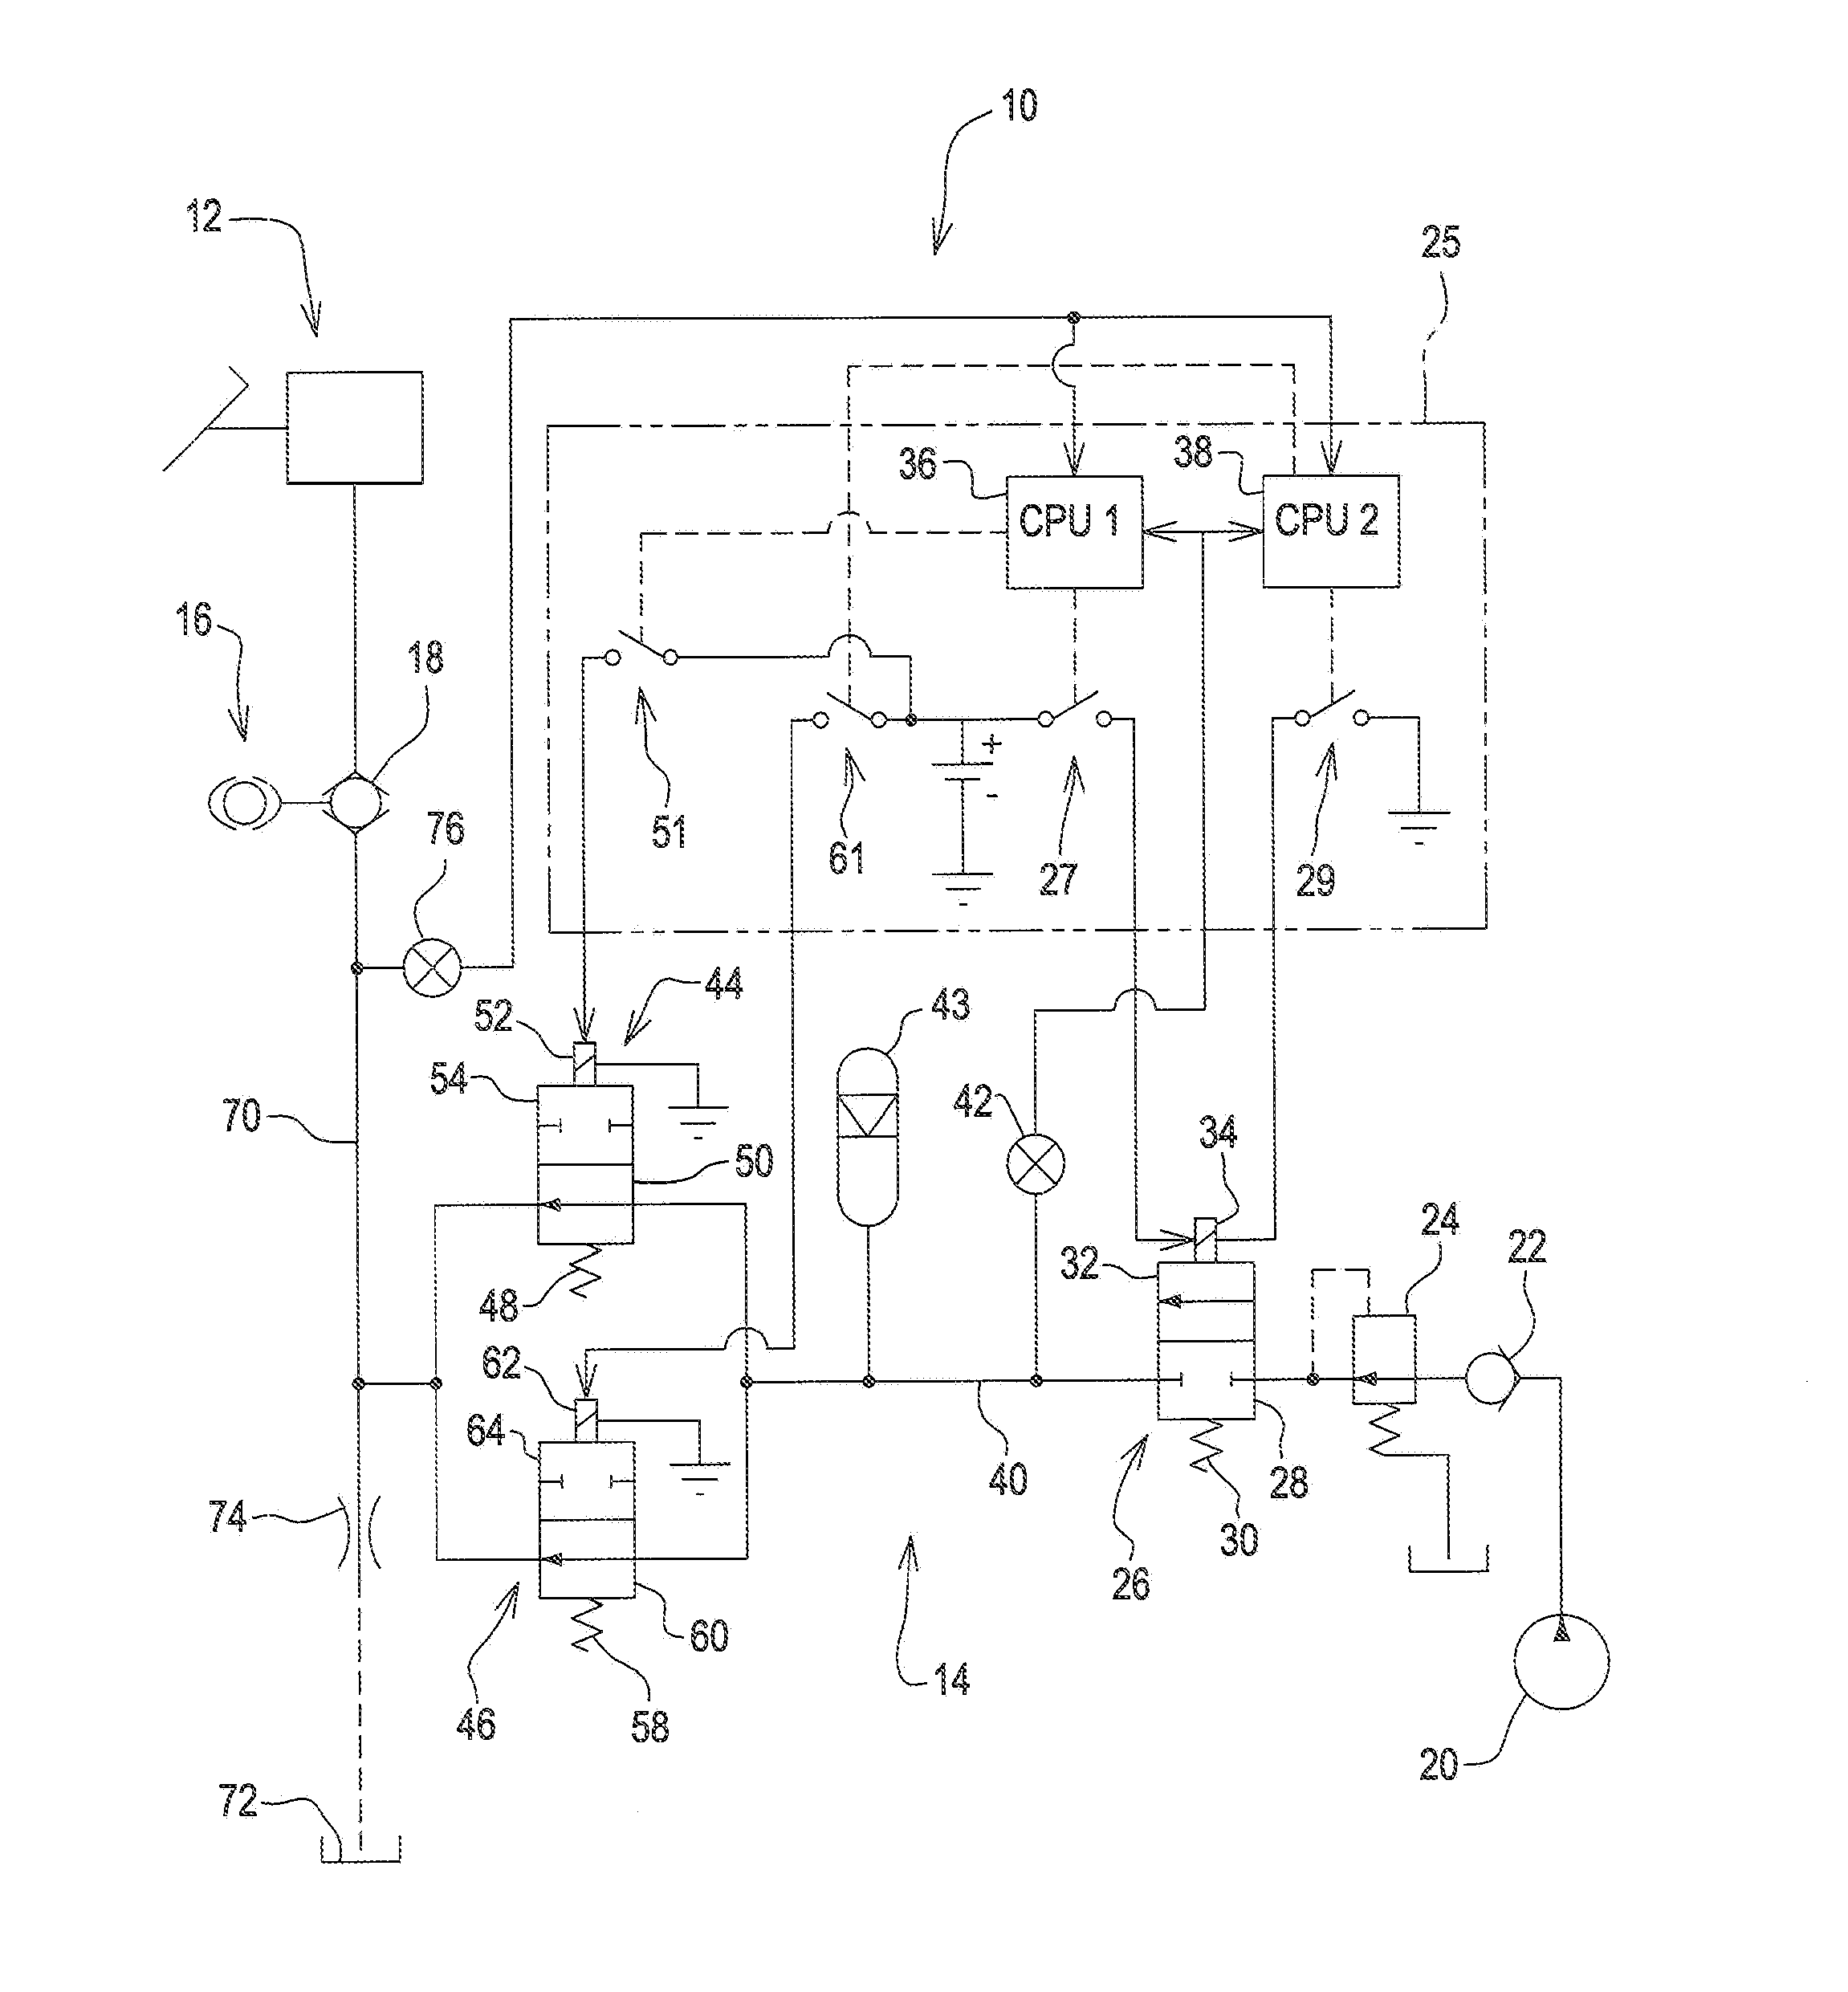 Brake Control System For Dual Mode Vehicle